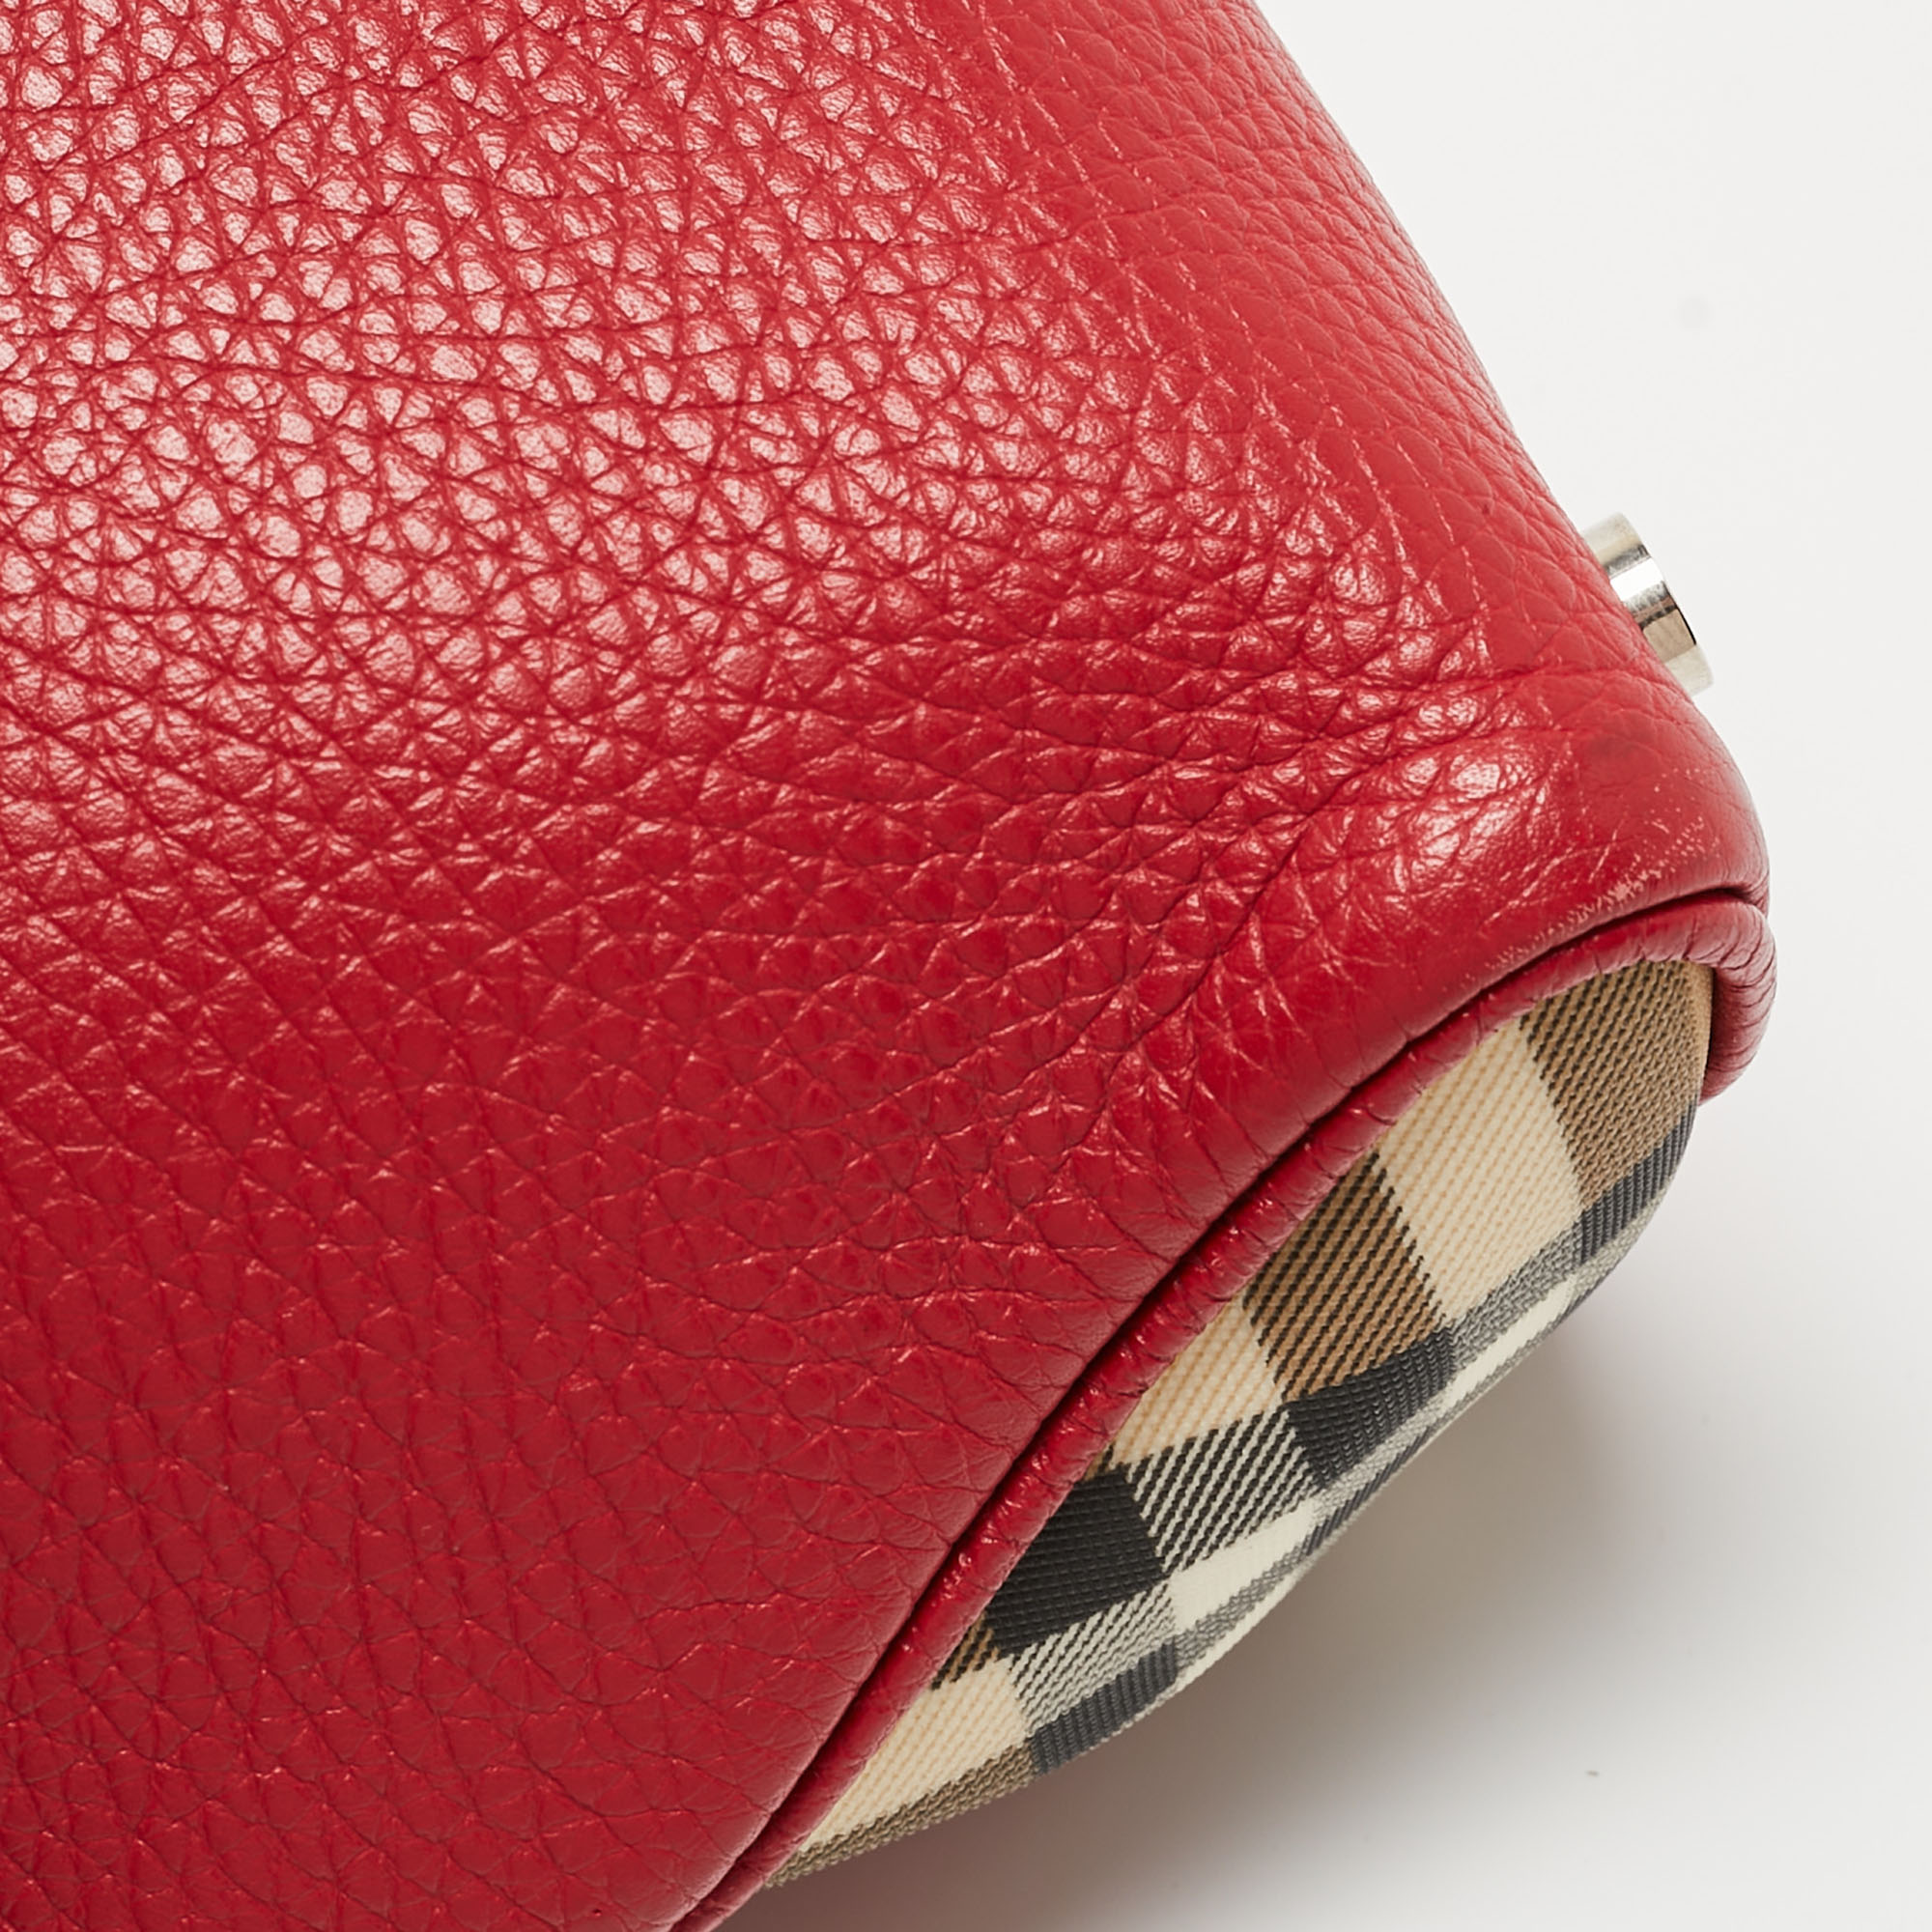 Burberry Red Leather Shark Tooth Tote